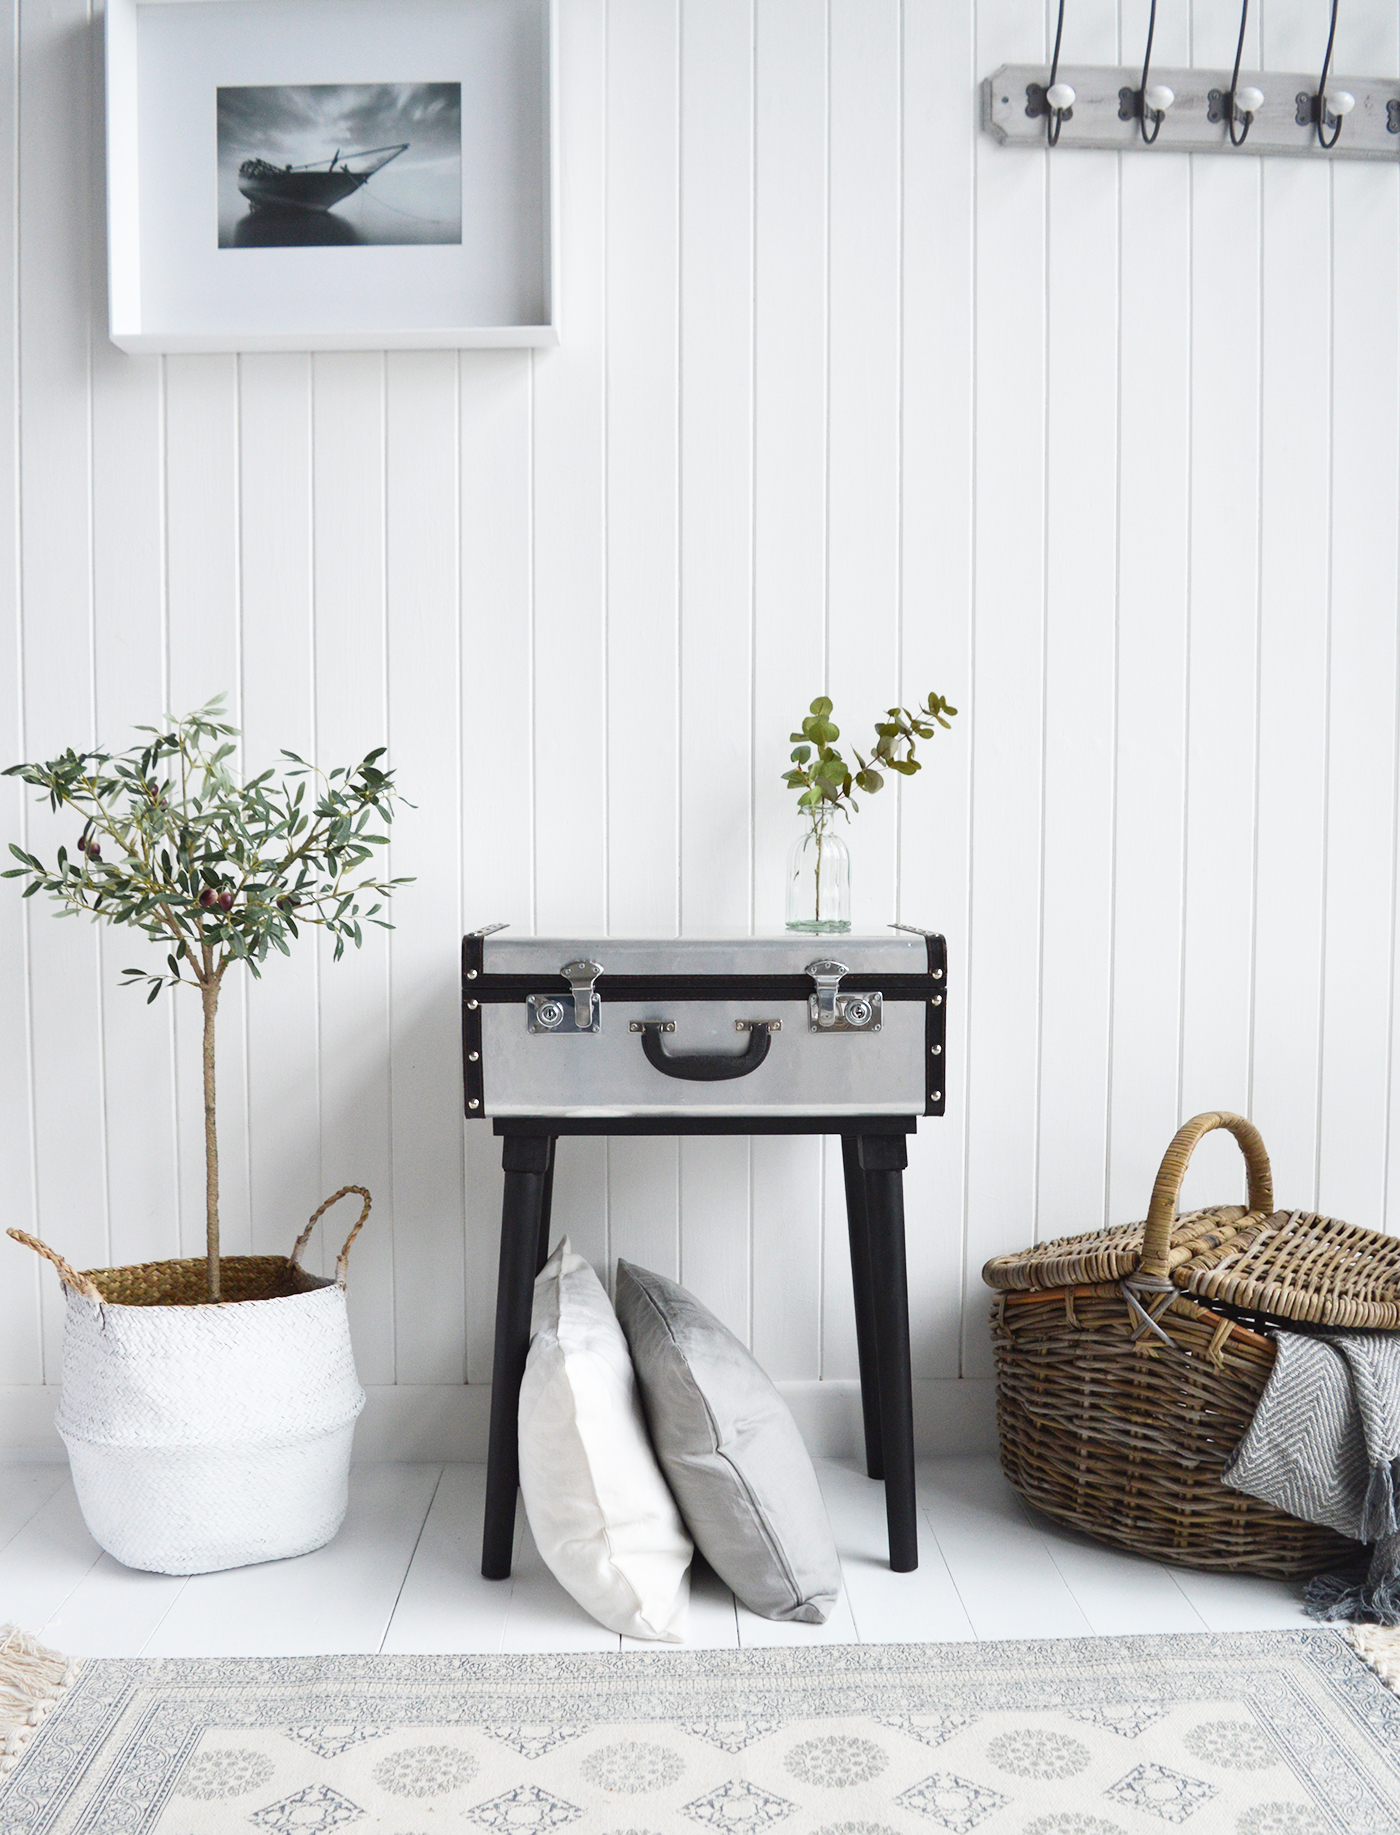 The Woodstock silver suitcase table.    A unique style of side table in the style of a vintage suitcase with lockable storage. Ideal as a bedside or lamp table in the living room or hallway.    Finished in a brushed slightly distressed silver metal, traditional lockable clasps, metal studding, black edging and black wooden legs